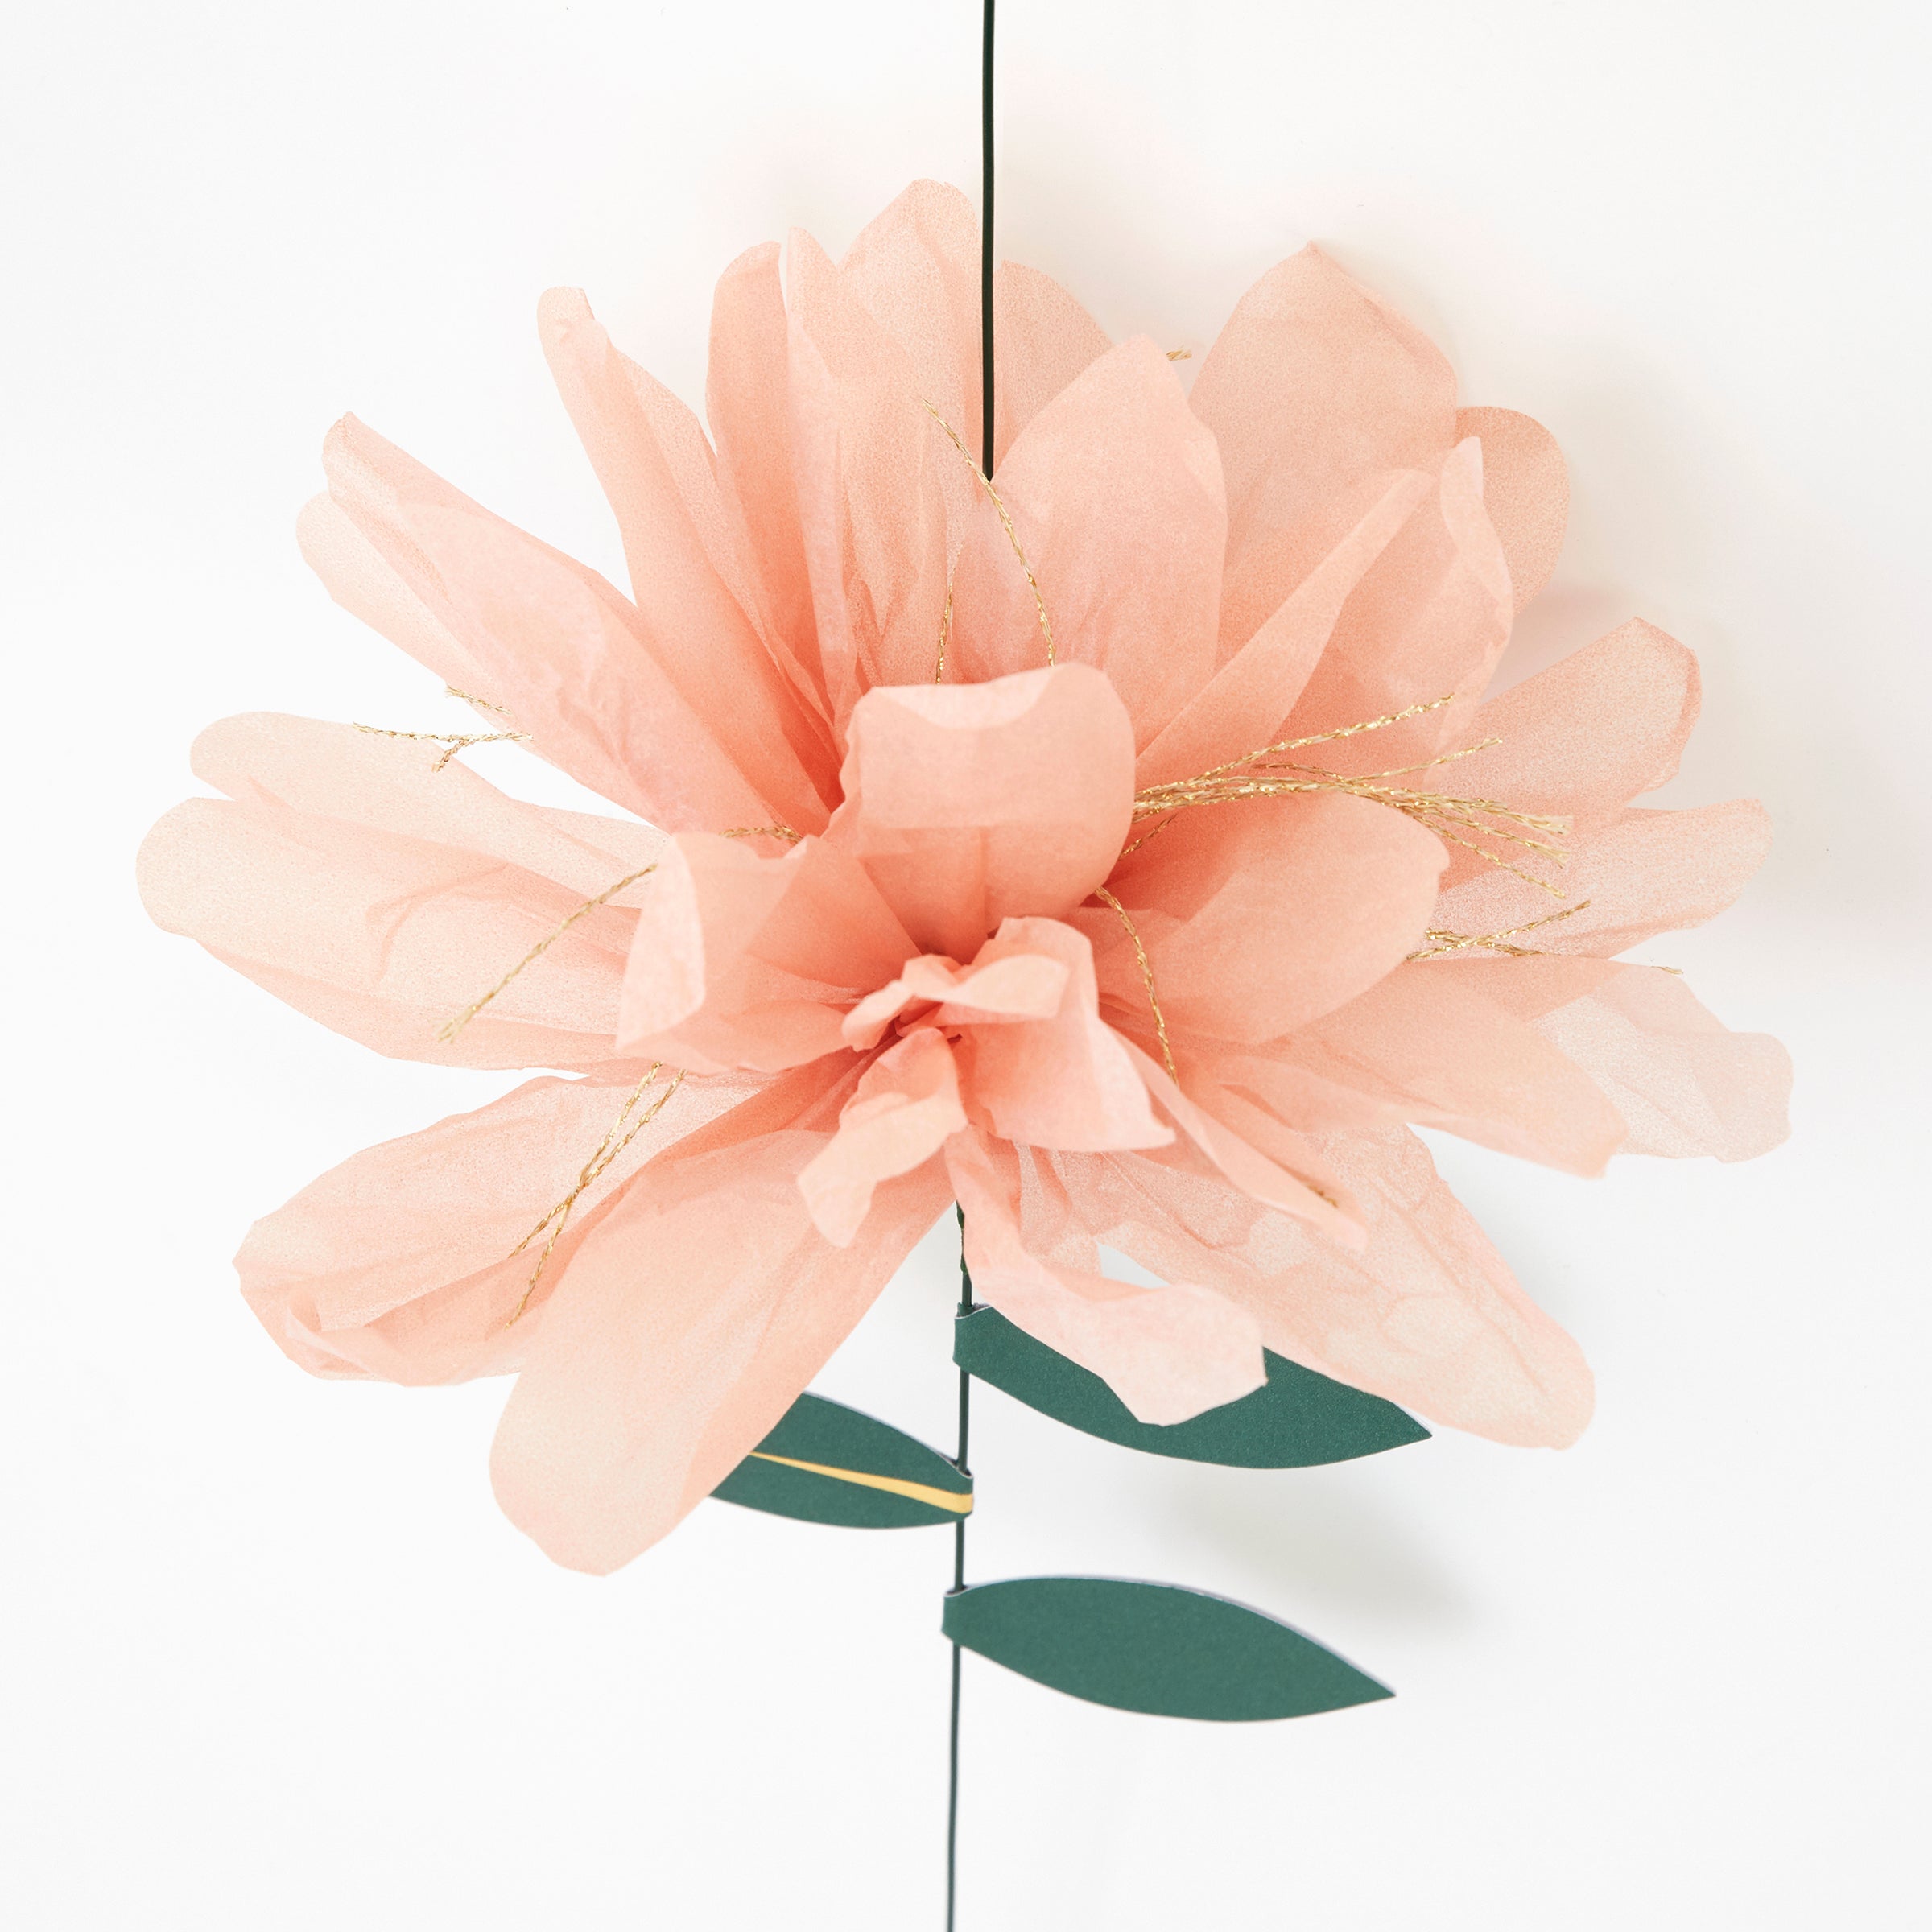 This fabulous flower decoration is crafted from colorful tissue paper flowers, with gold foil  and green leaves.